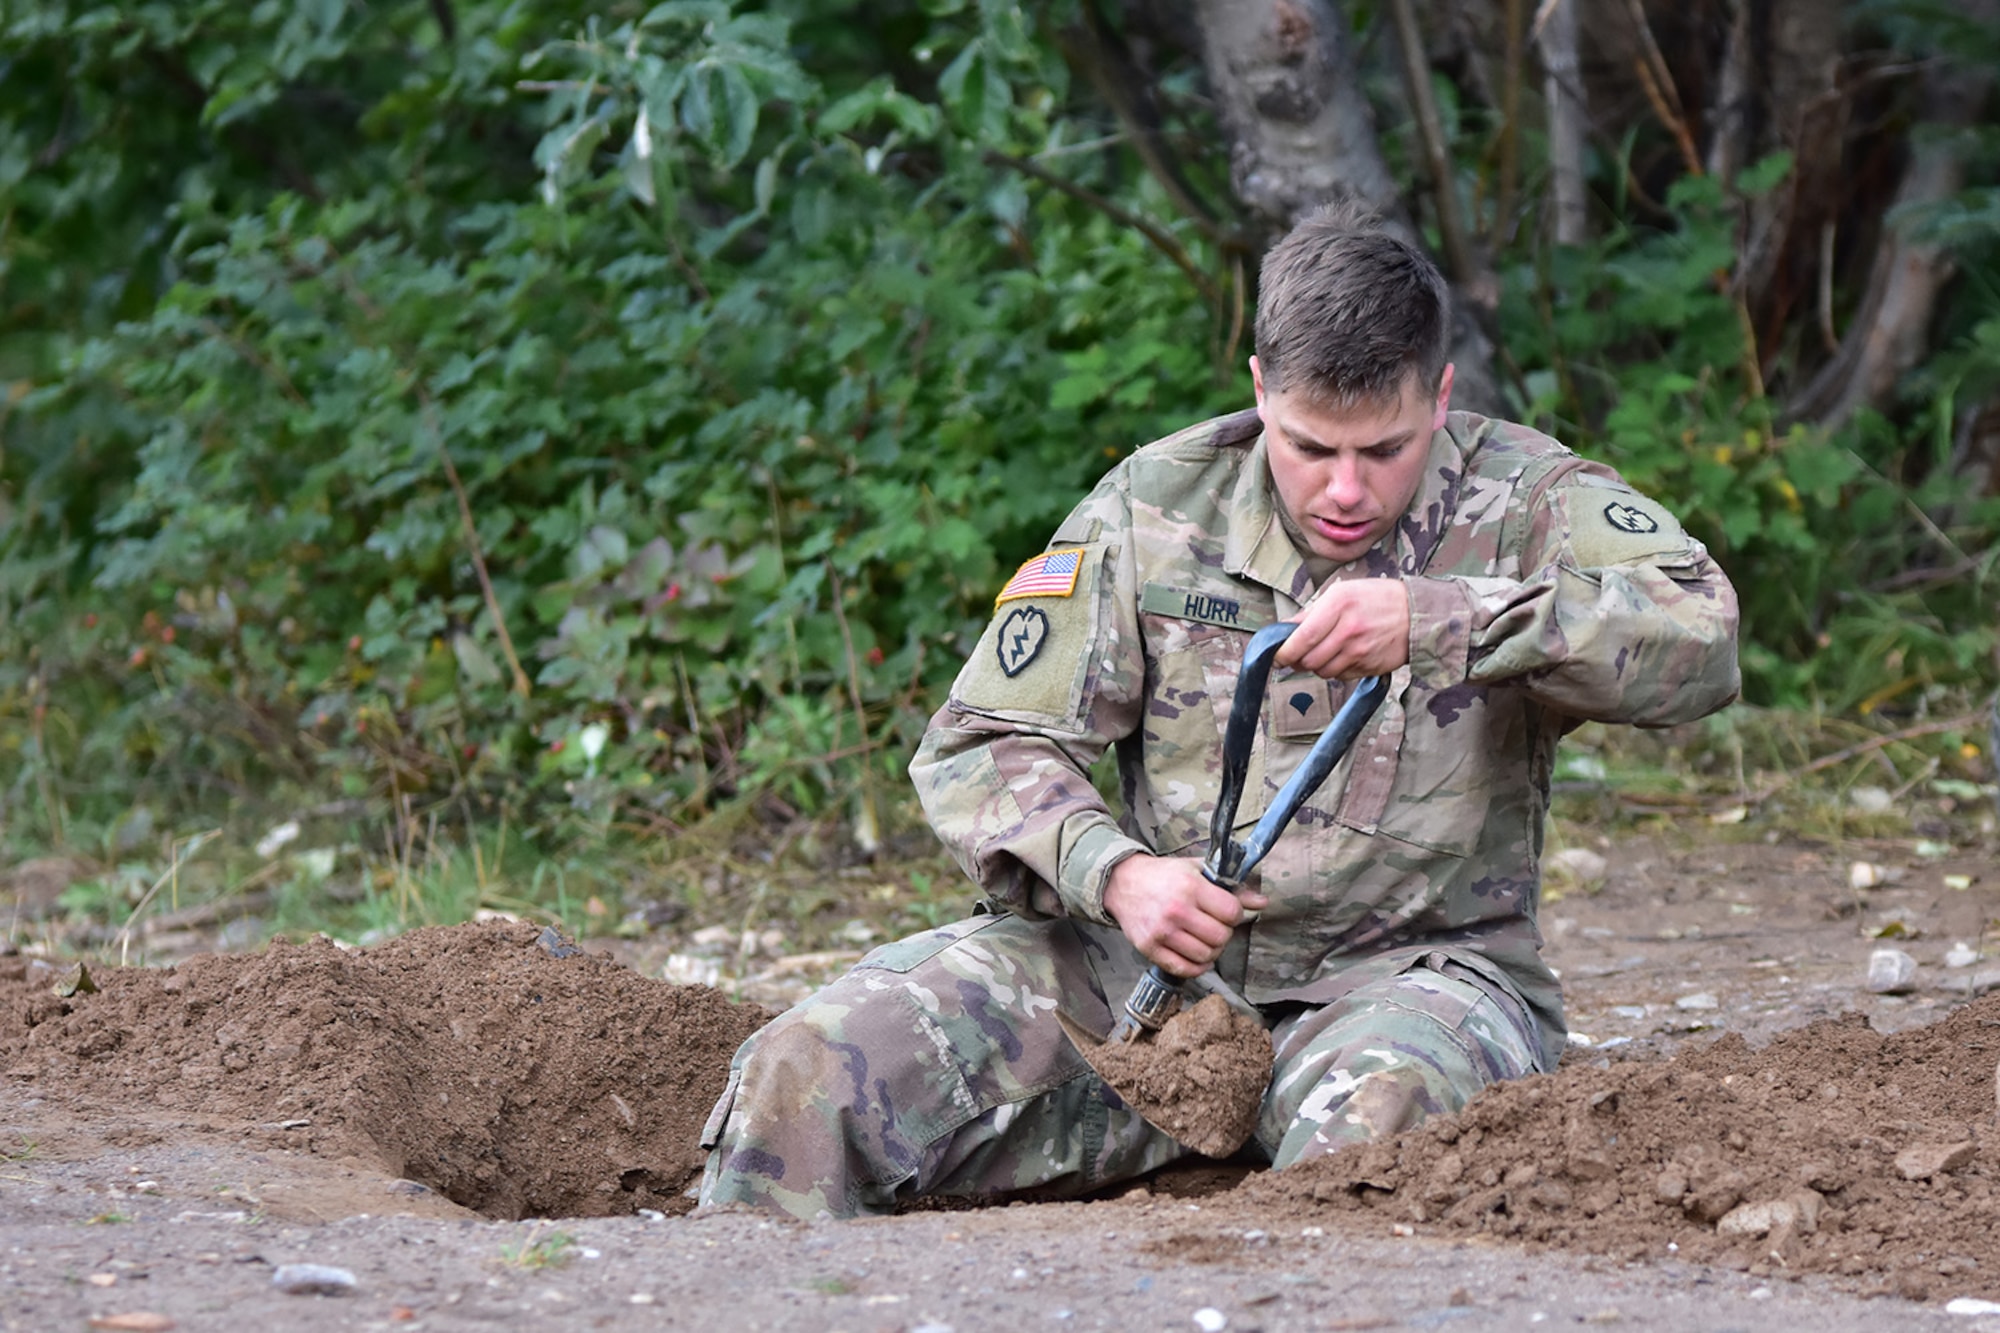 Spc. Jadyn Hurr digs a hole to create an anchor point for climbing and rappelling at the Northern Warfare Training Center’s Black Rapids Site during training. NWTC cadre followed Coronavirus restrictions while guiding students through both the basic and advanced mountaineering courses in August. With the advent of Alaska’s long, cold winter, NWTC’s focus is now shifting to cold weather training for the 2020-21 season.